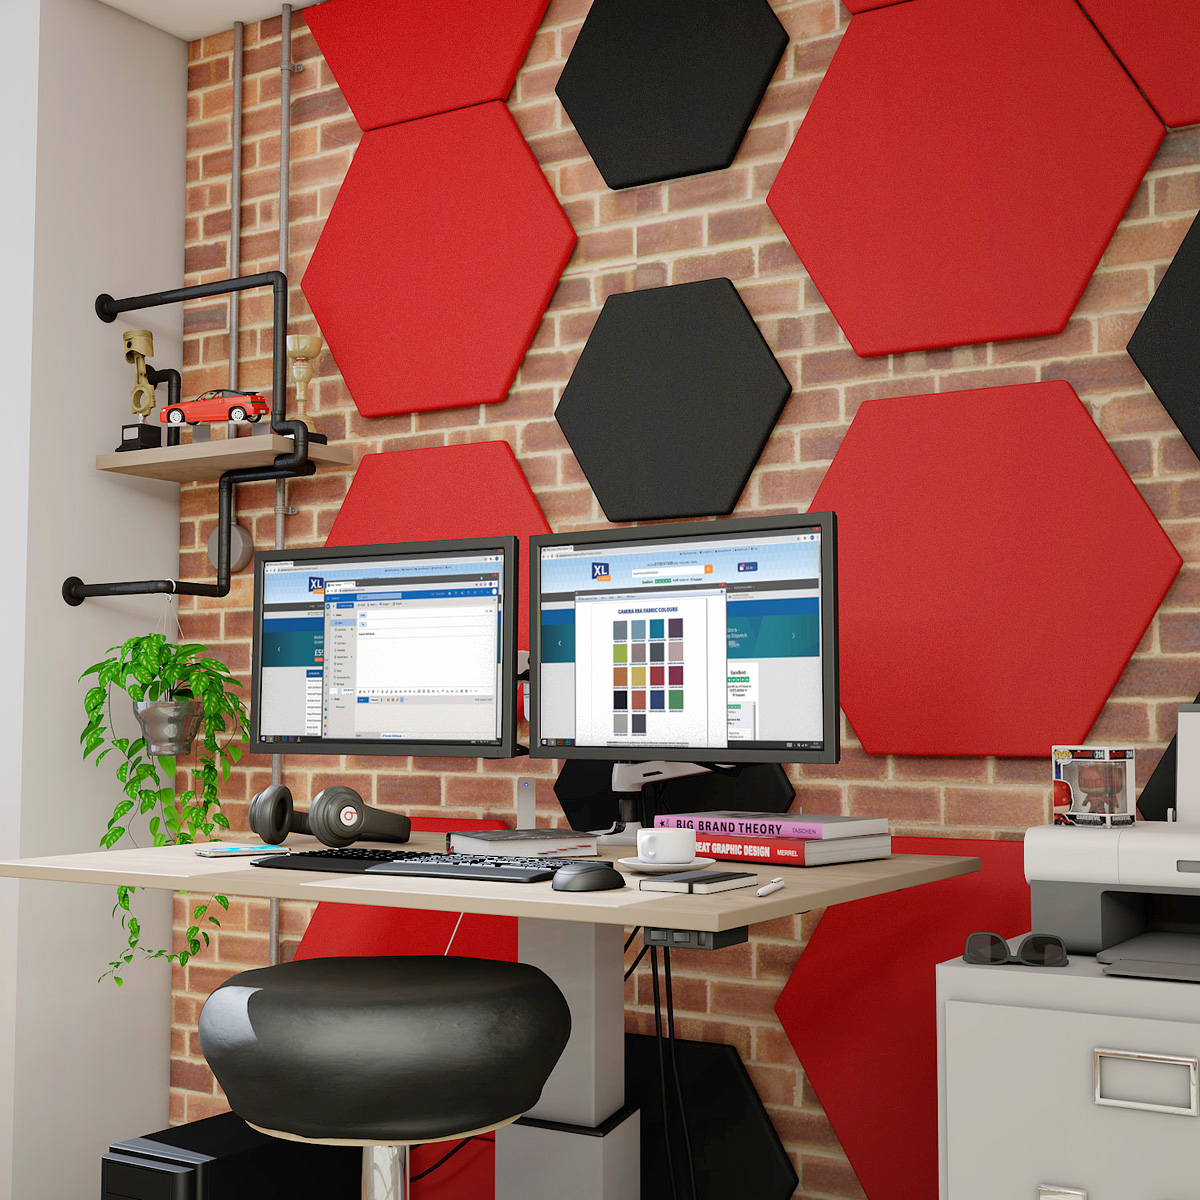 ZAGATO™ Hexagonal Acoustic Wall Panelling Creates a Soundproofing Wall For Sound Reverberations